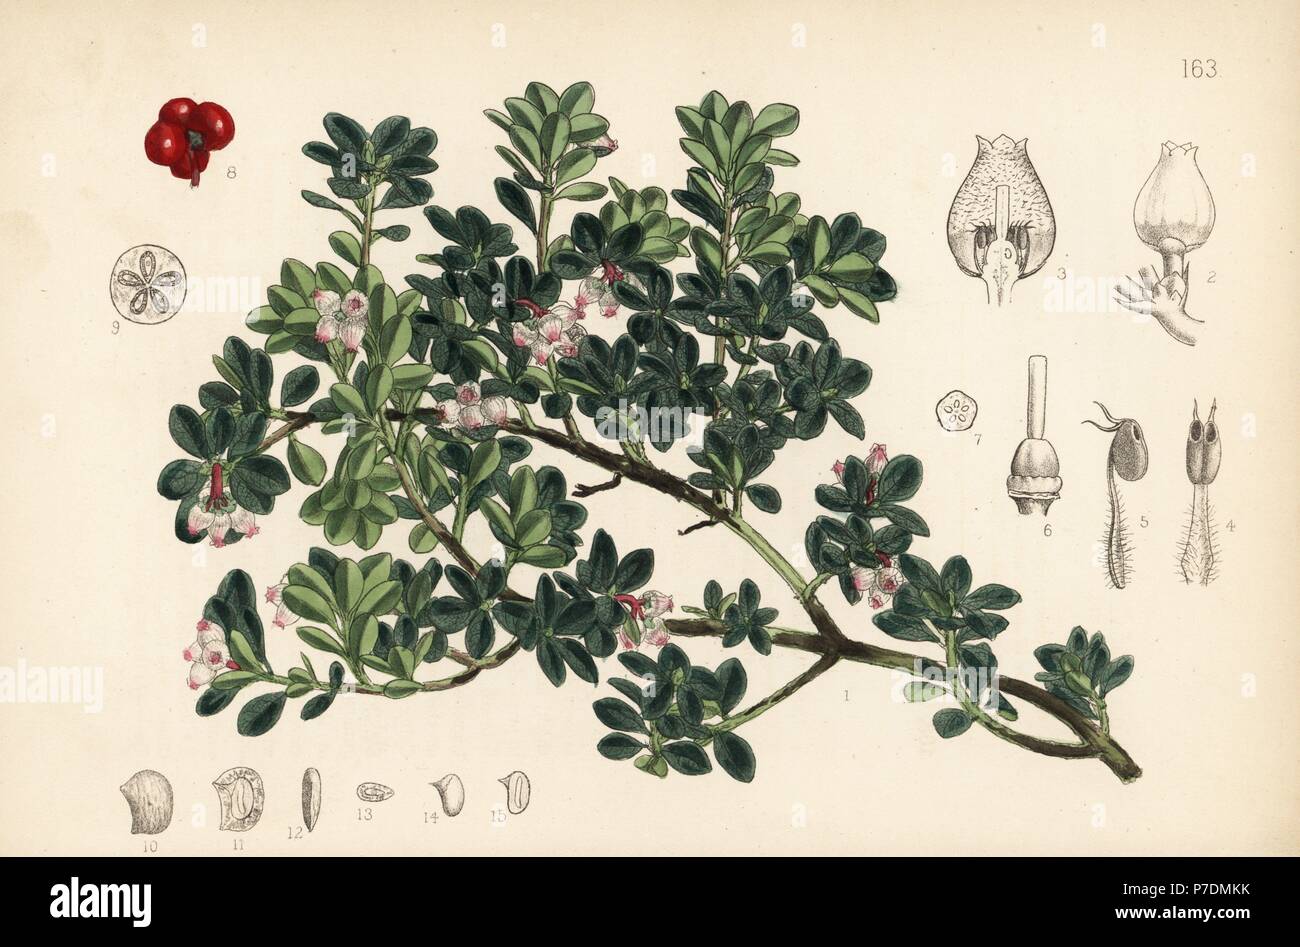 Bearberry, Arctostaphylos uva-ursi. Handcoloured lithograph by Hanhart after a botanical illustration by David Blair from Robert Bentley and Henry Trimen's Medicinal Plants, London, 1880. Stock Photo